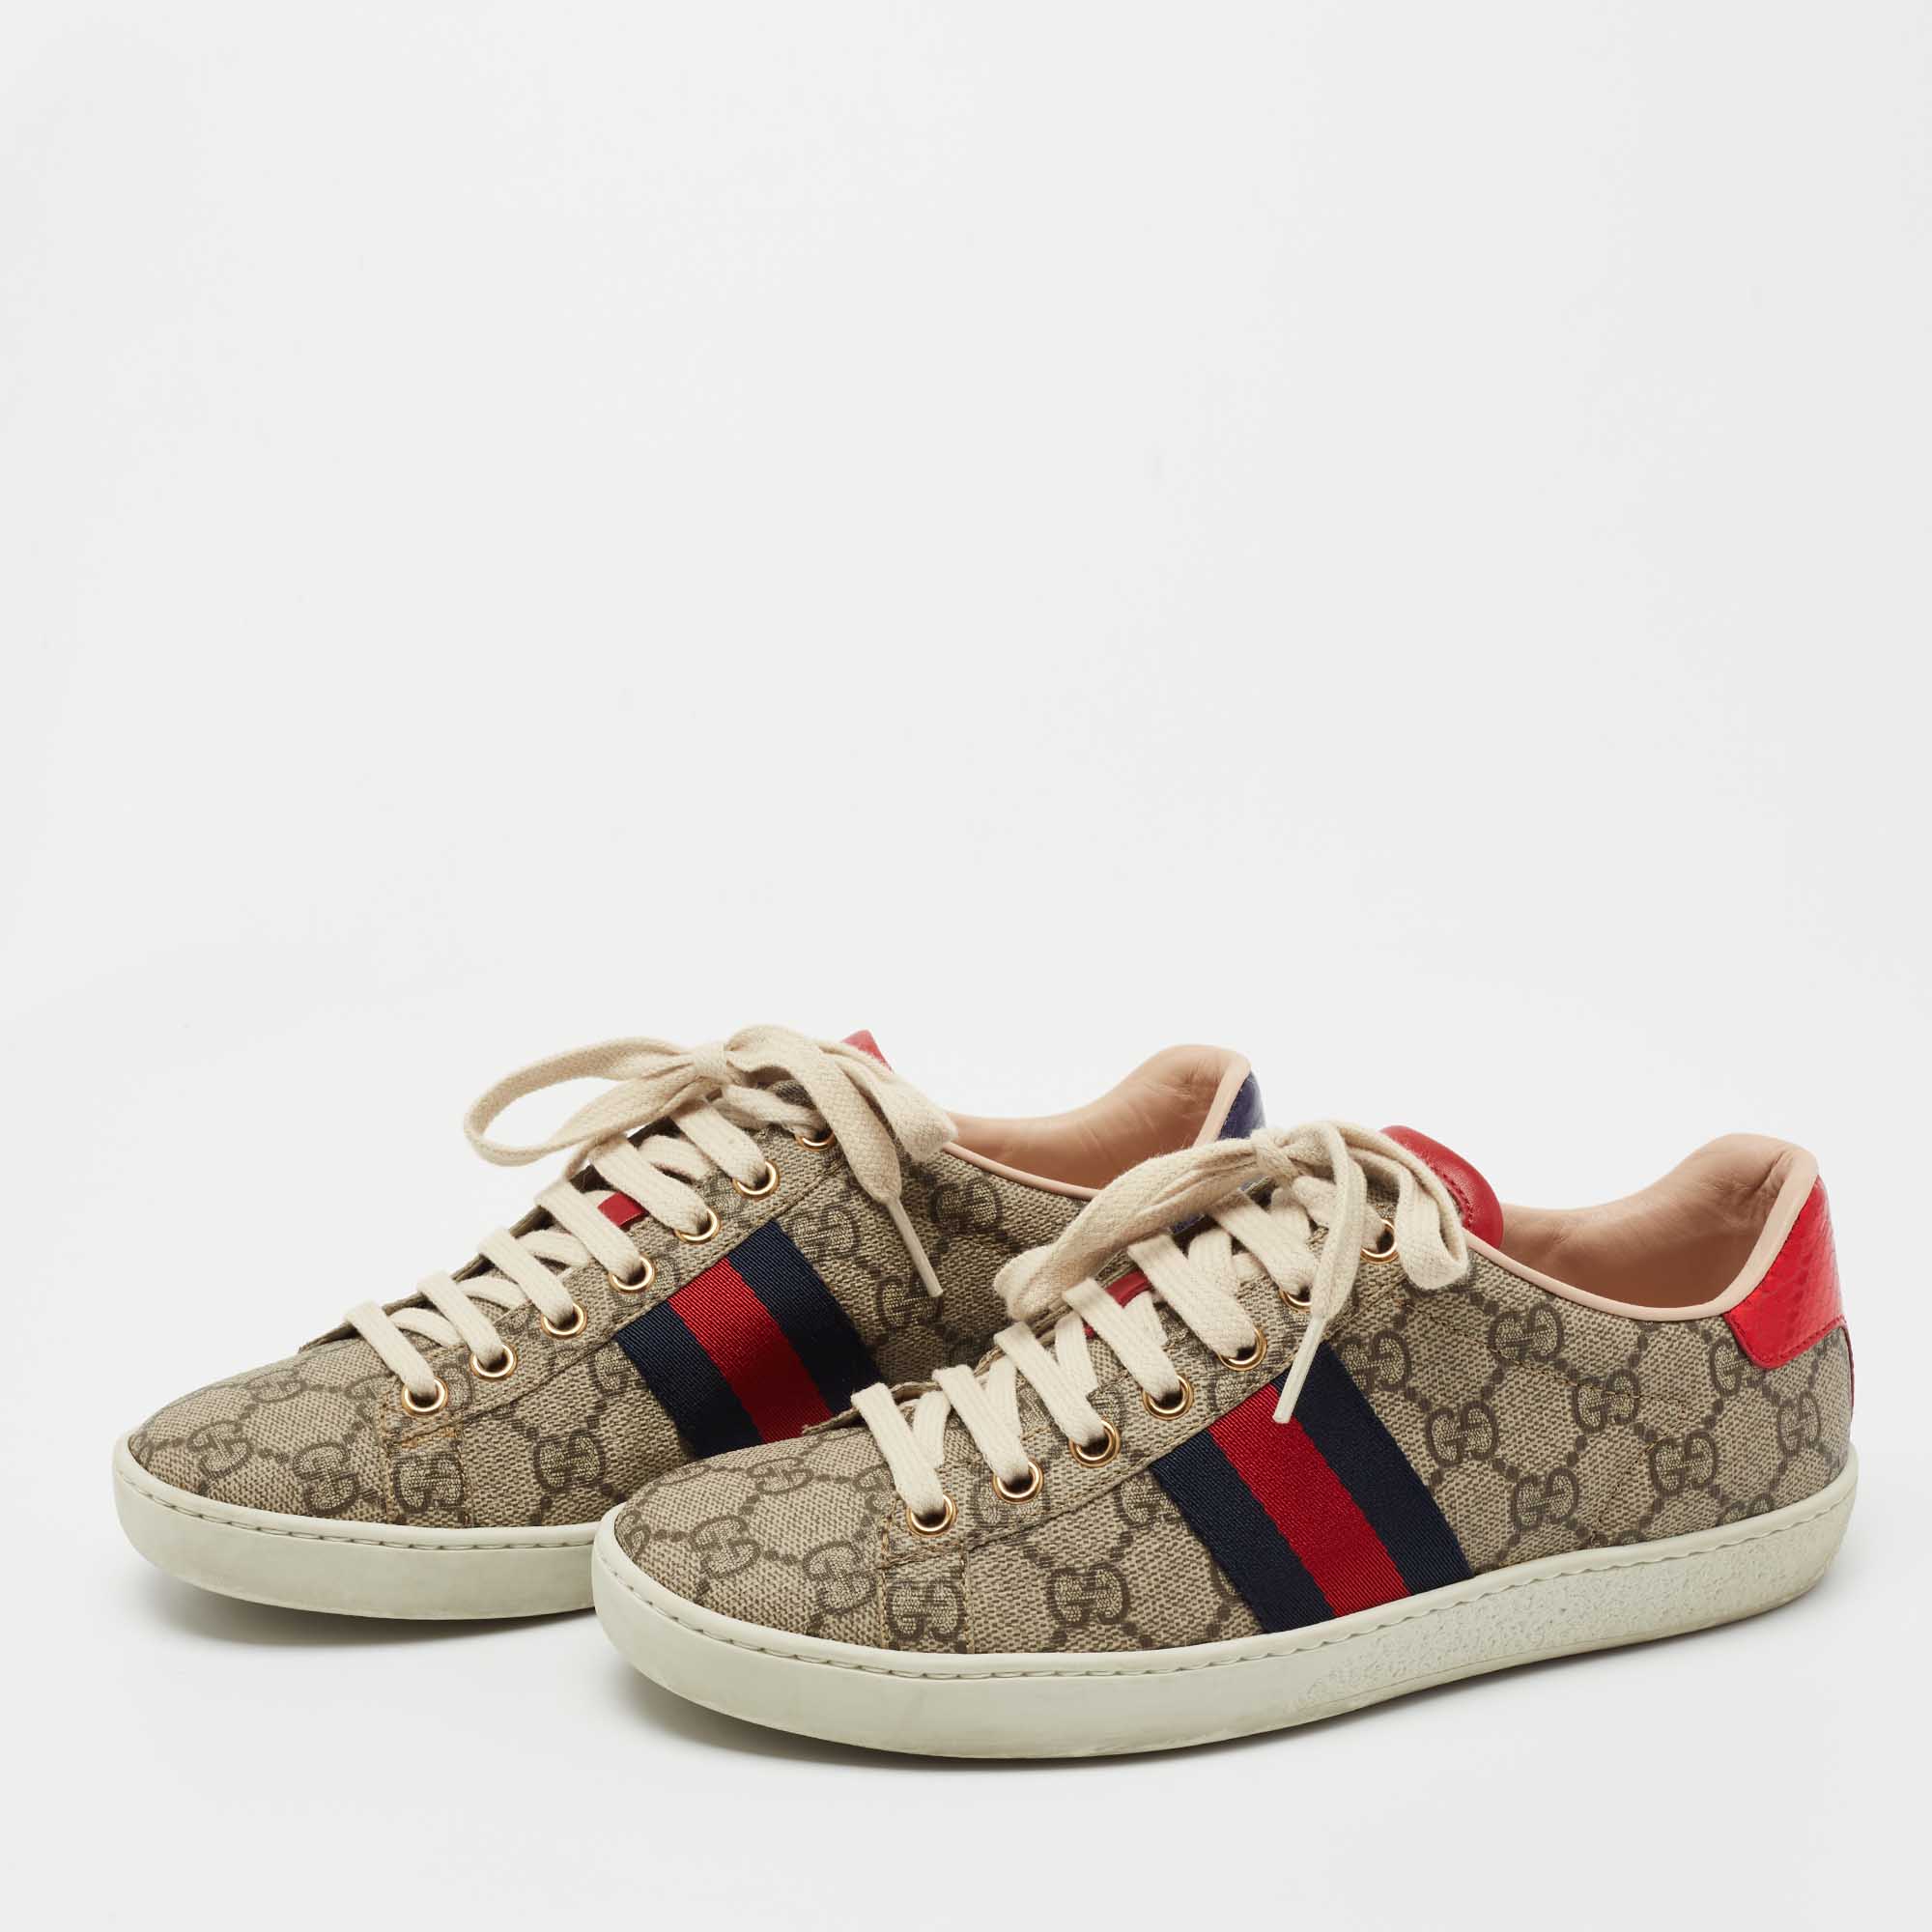 

Gucci Beige/Brown GG Supreme Canvas Ace Web Low Top Sneakers Size